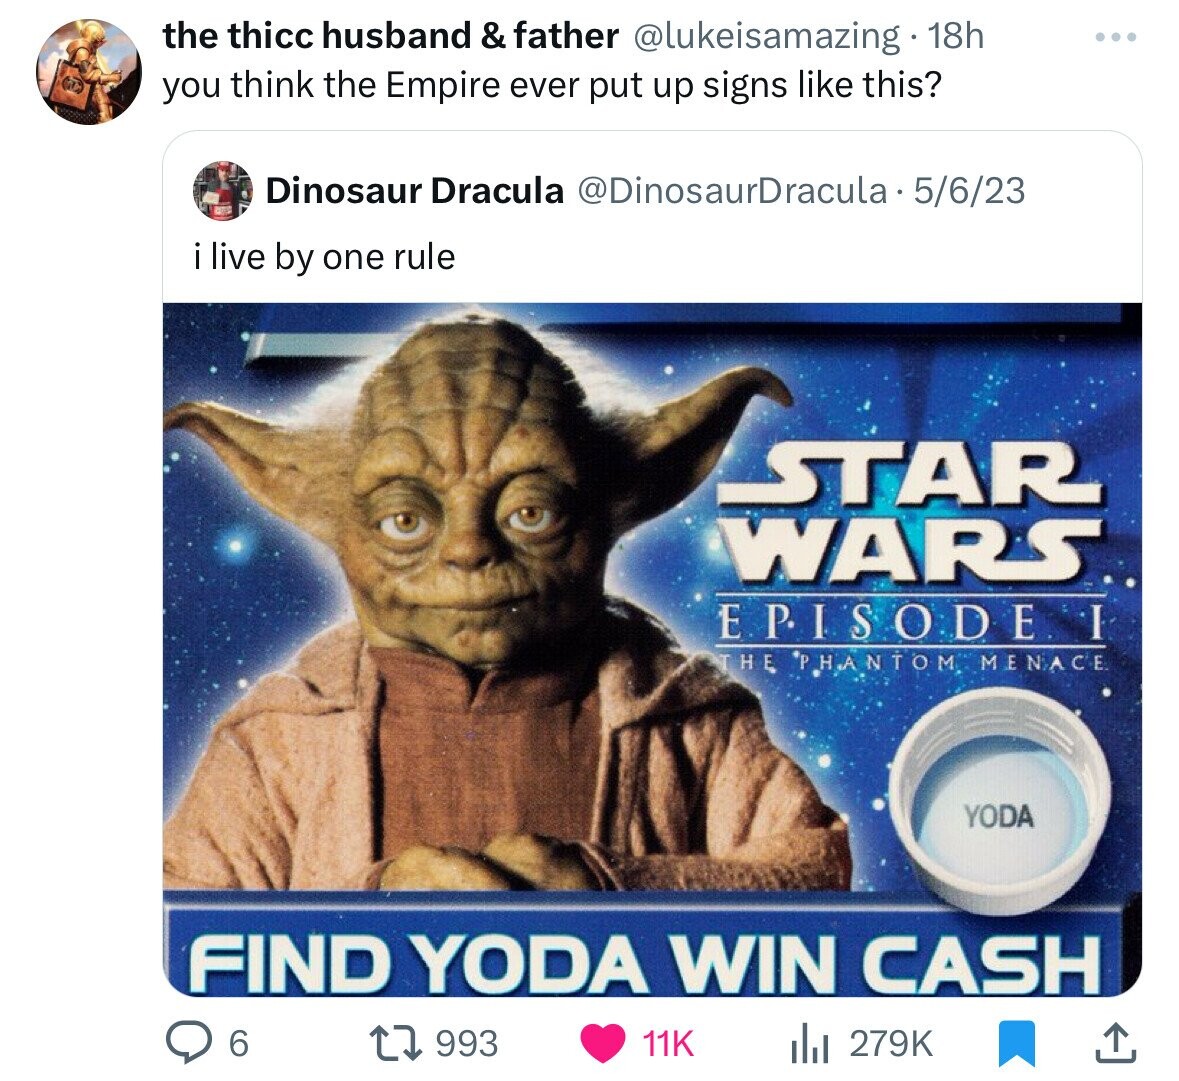 the thicc husband & father @lukeisamazing 18h you think the Empire ever put up signs like this? Dinosaur Dracula @DinosaurDracula 5/6/23 i live by one rule STAR WARS EPISODE THE PHANTOM MENACE YODA FIND YODA WIN CASH 6 993 11K del 279K 